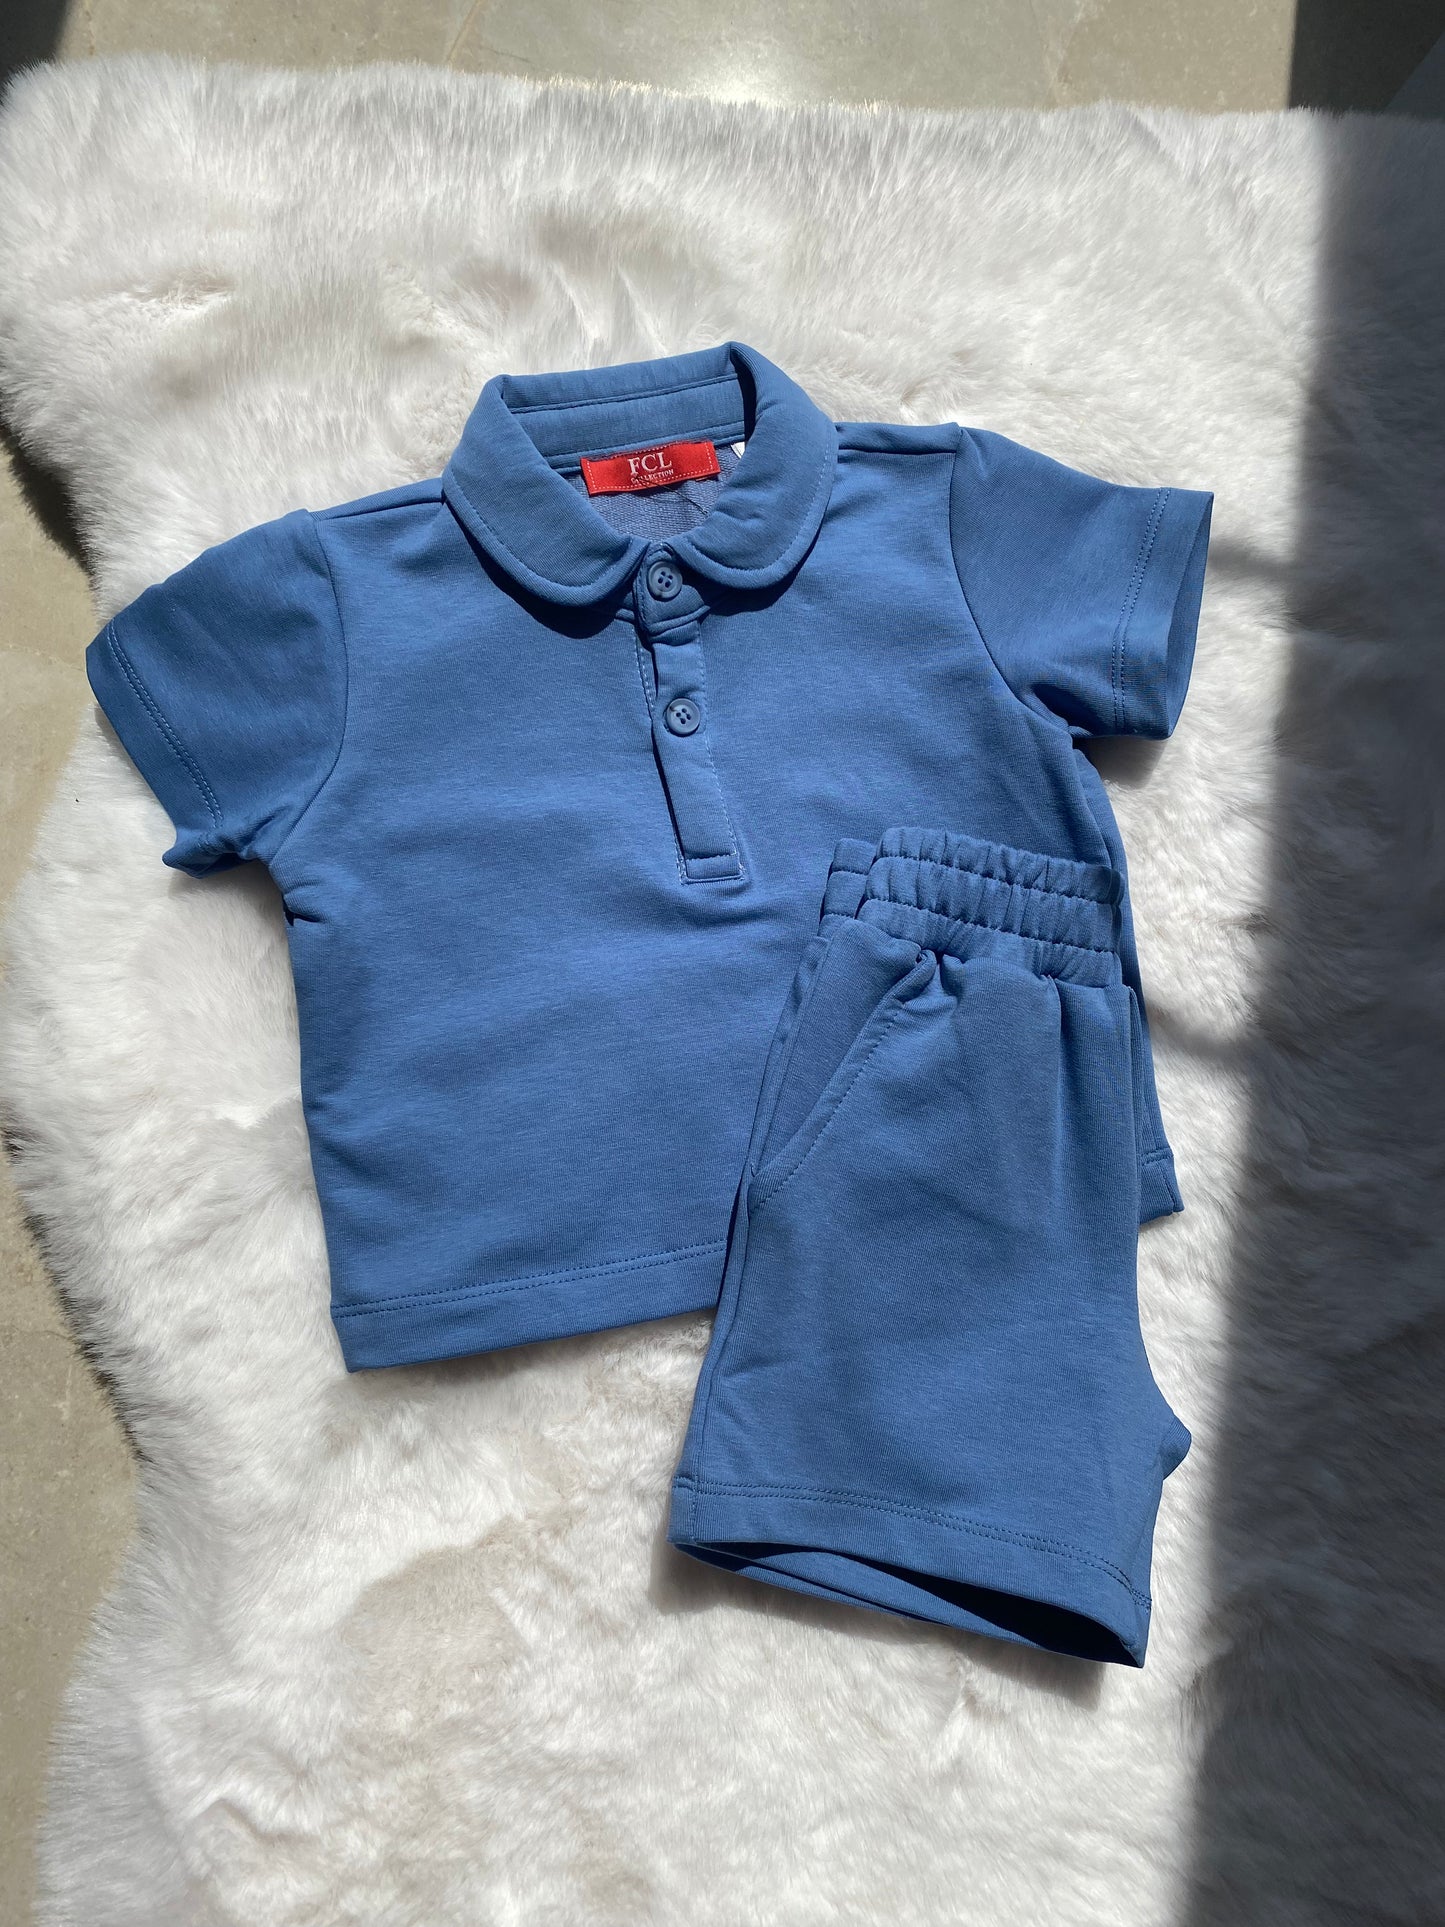 Baby Boys Blue Two-Piece Shorts Set